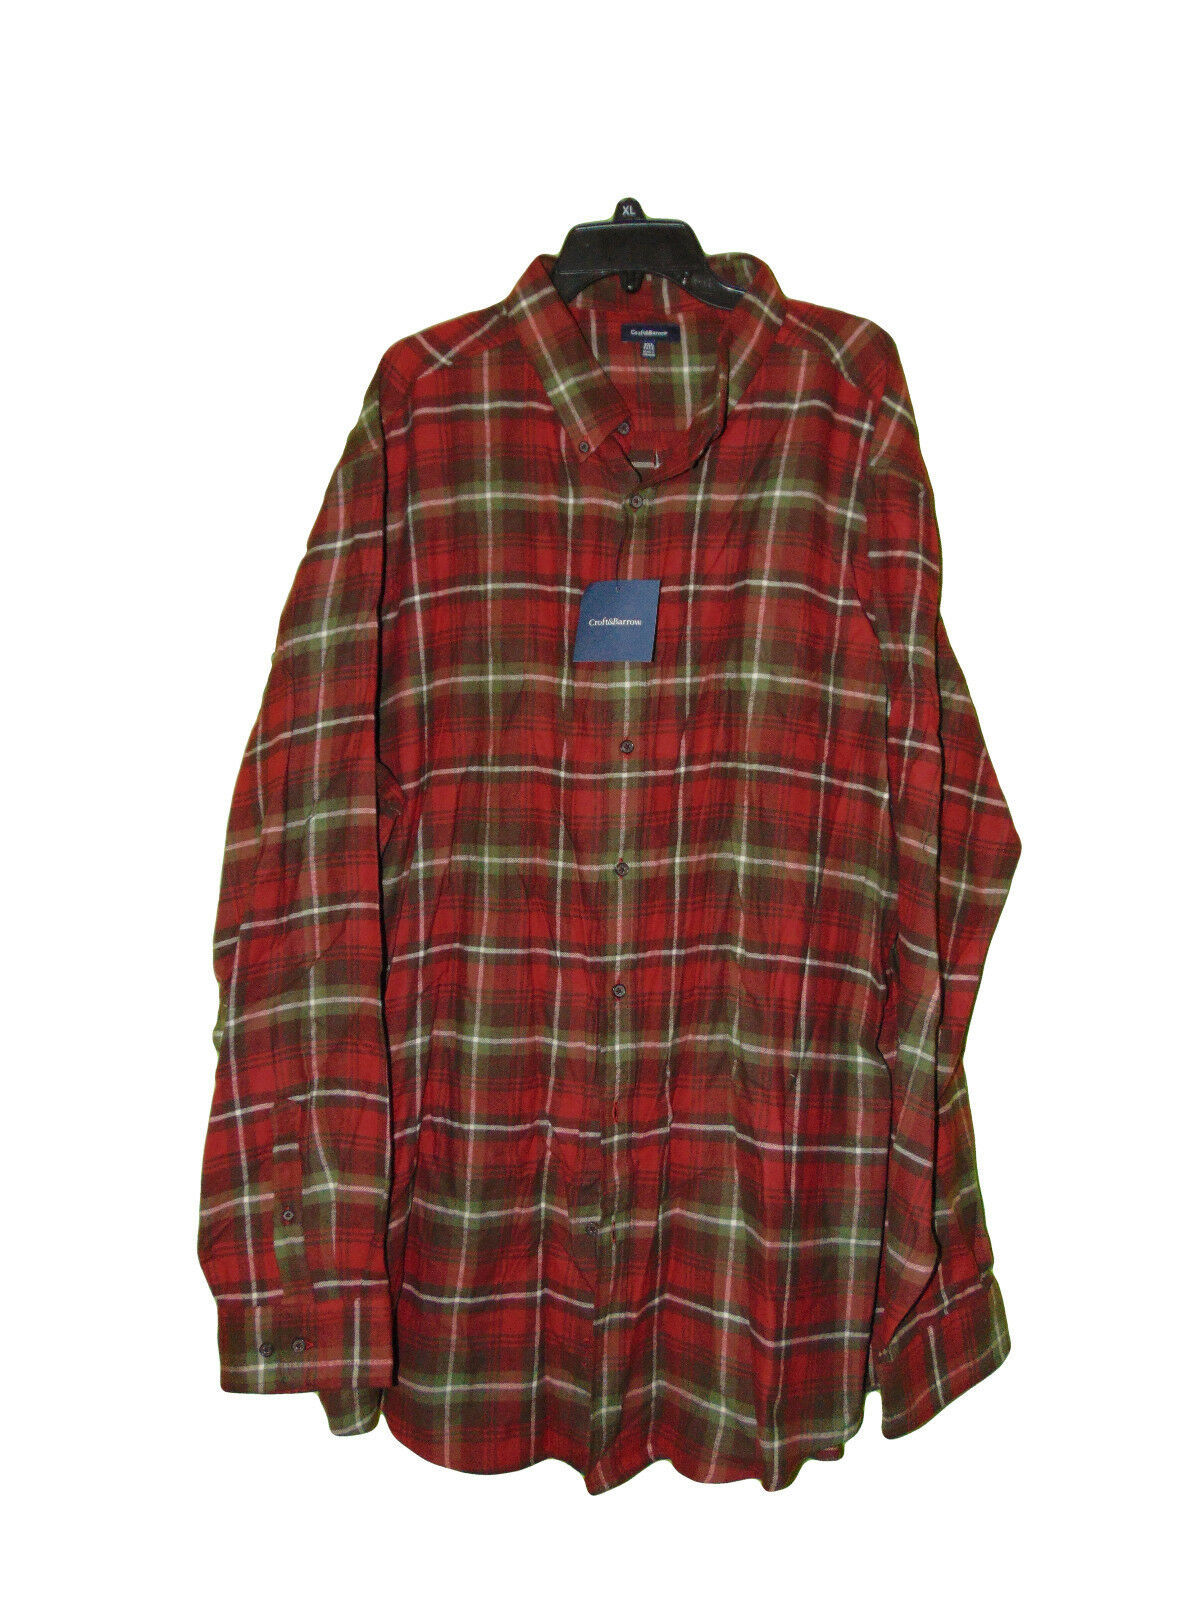 Croft And Barrow Red Flannel Shirt 3XLT Men New - Casual Shirts